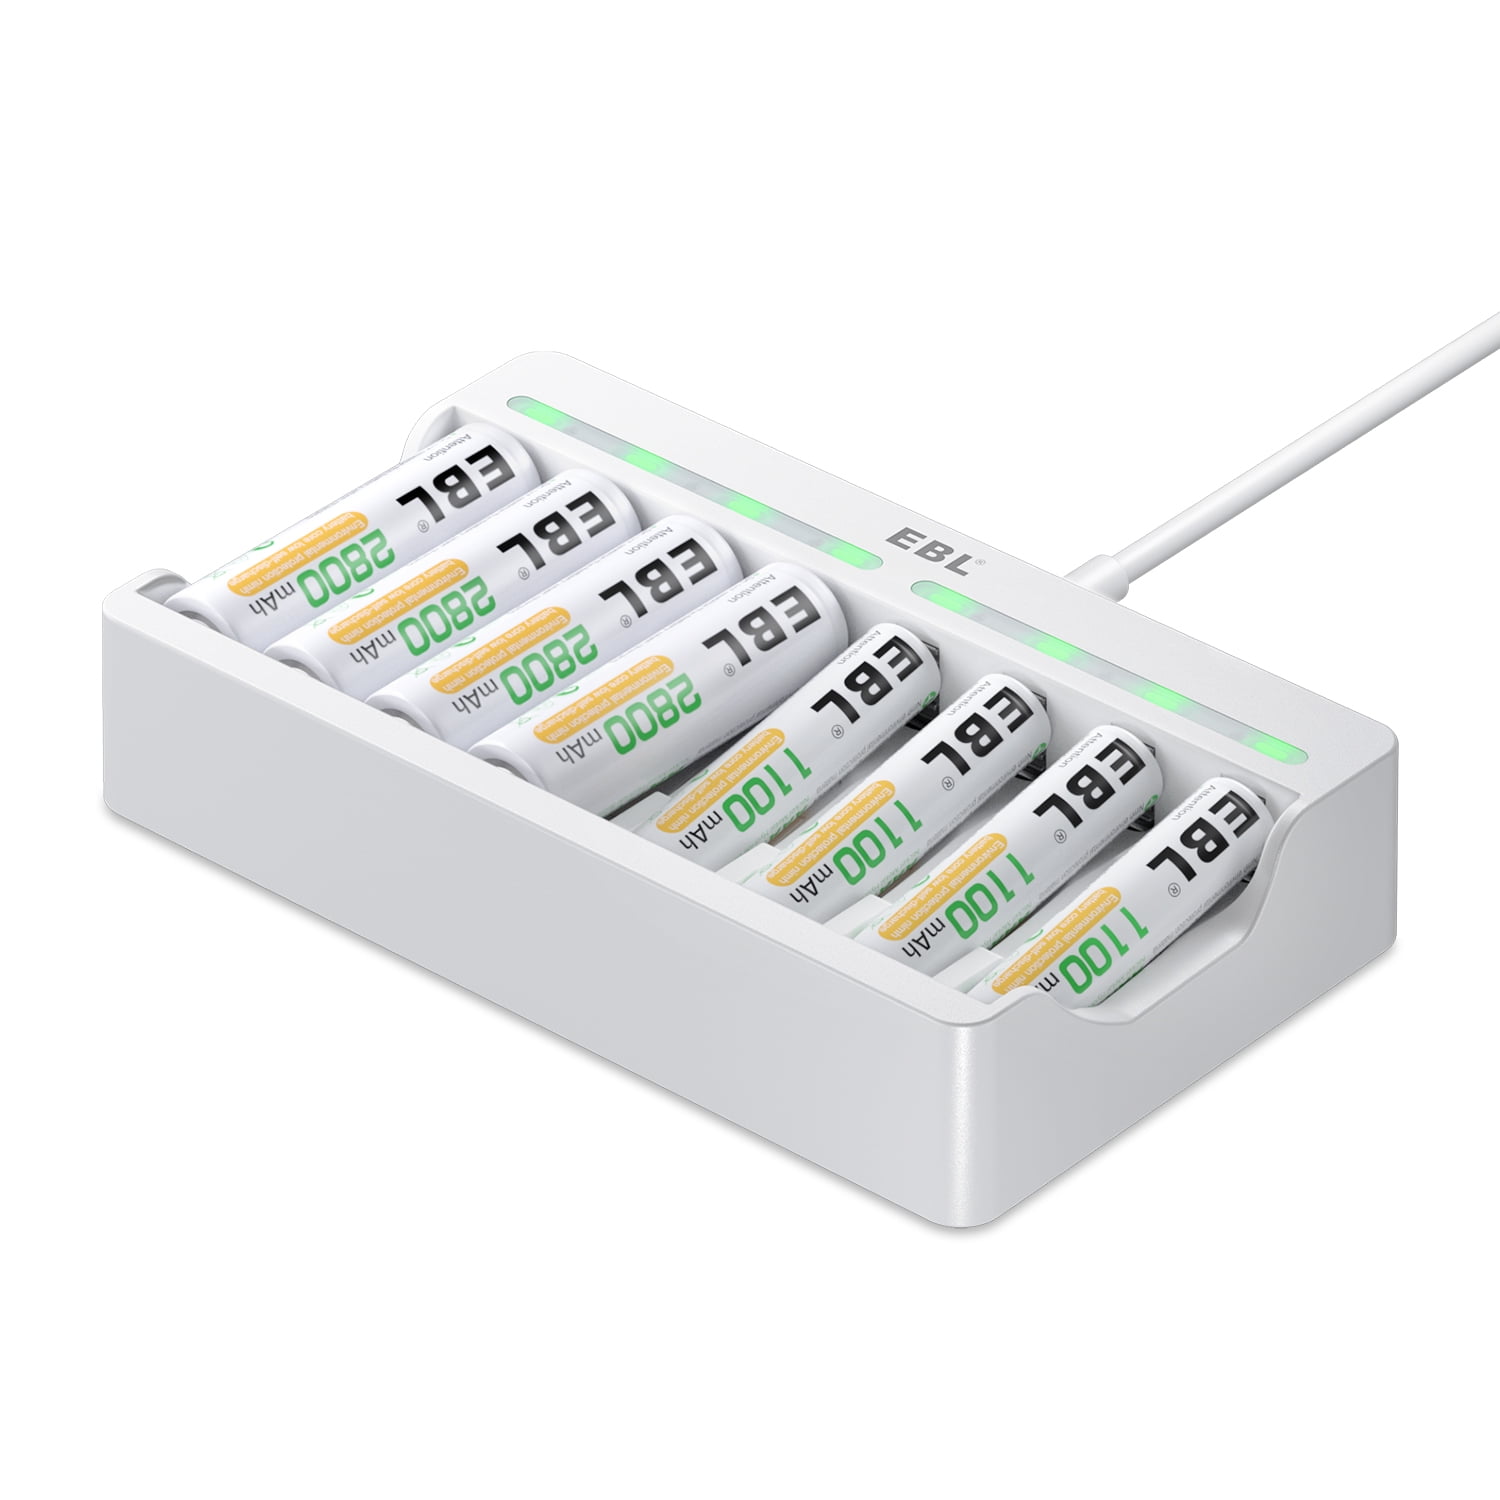 EBL Rechargeable AA Batteries 2800mAh (4 Pack) and AAA Rechargeable  Batteries 1100mAh (4 Pack) + 8 Bay Individual Battery Charger 